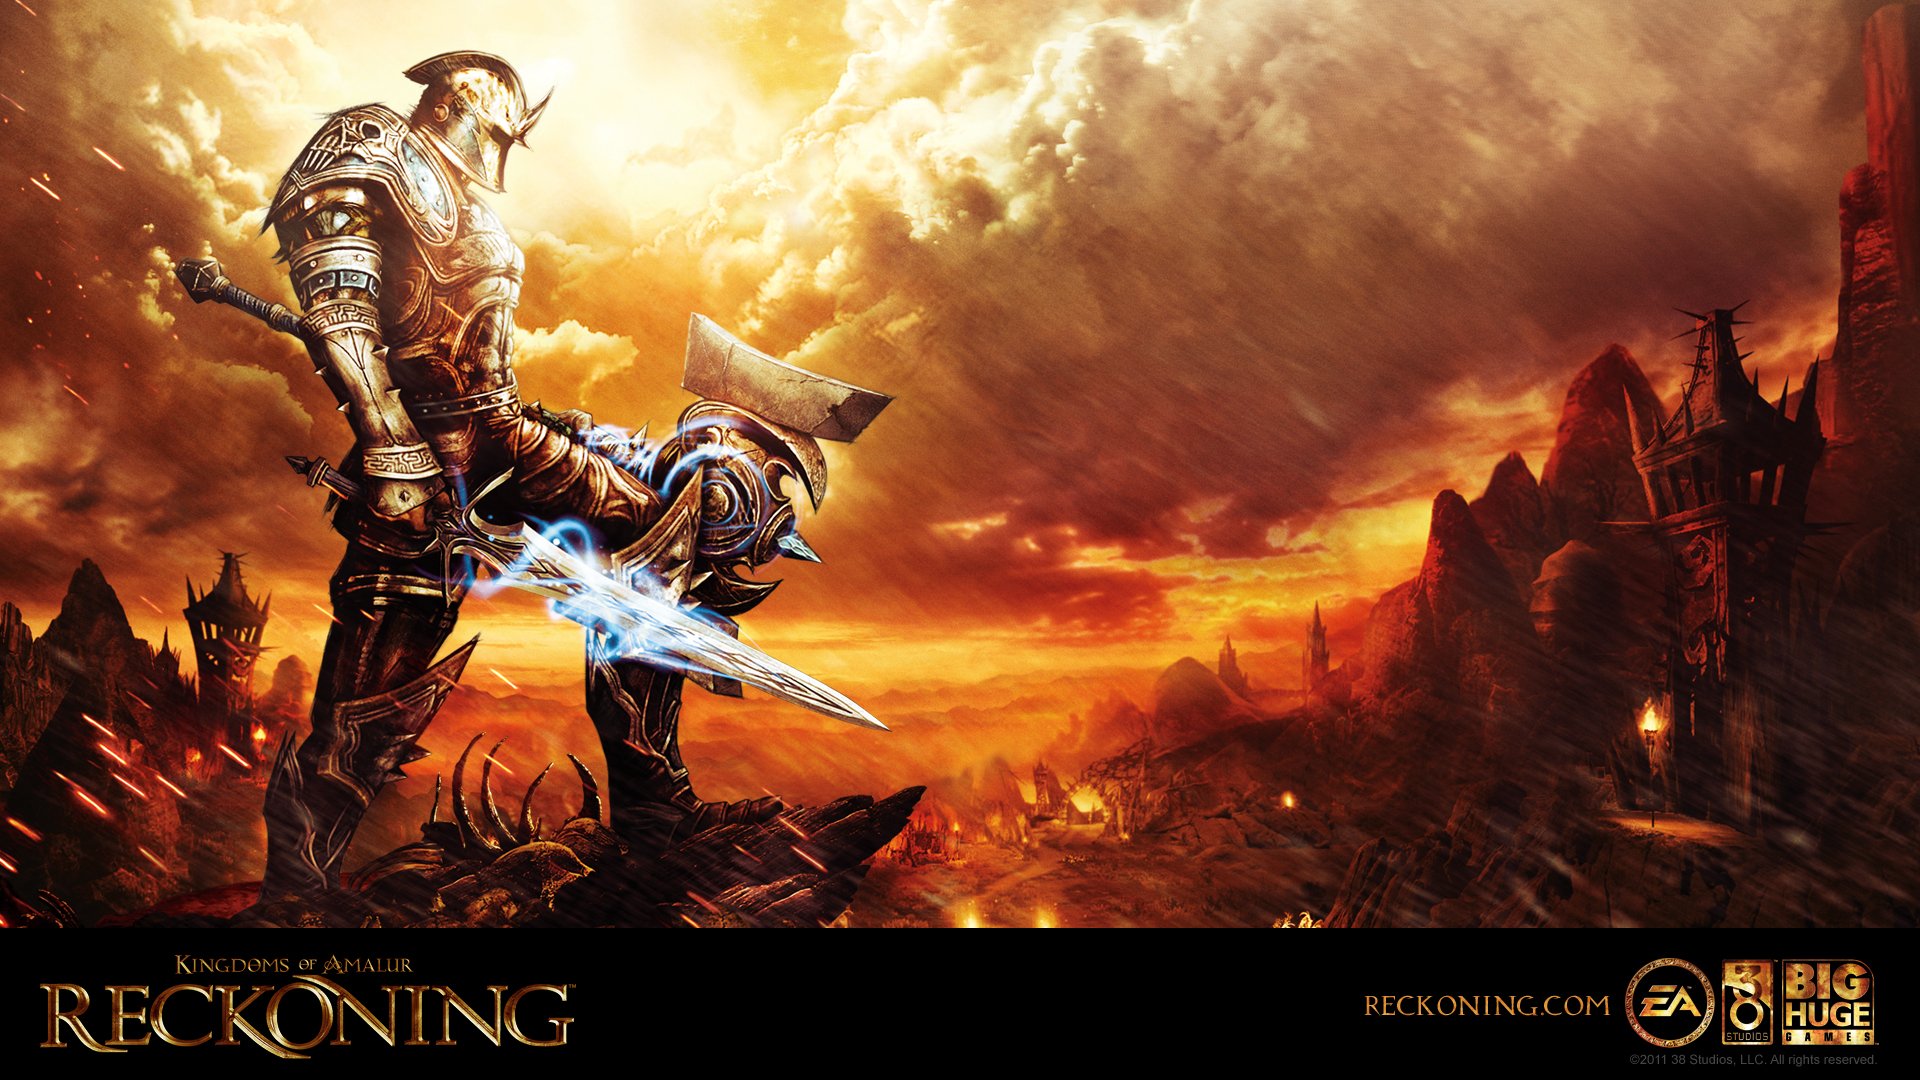 download kingdoms of amalur for free